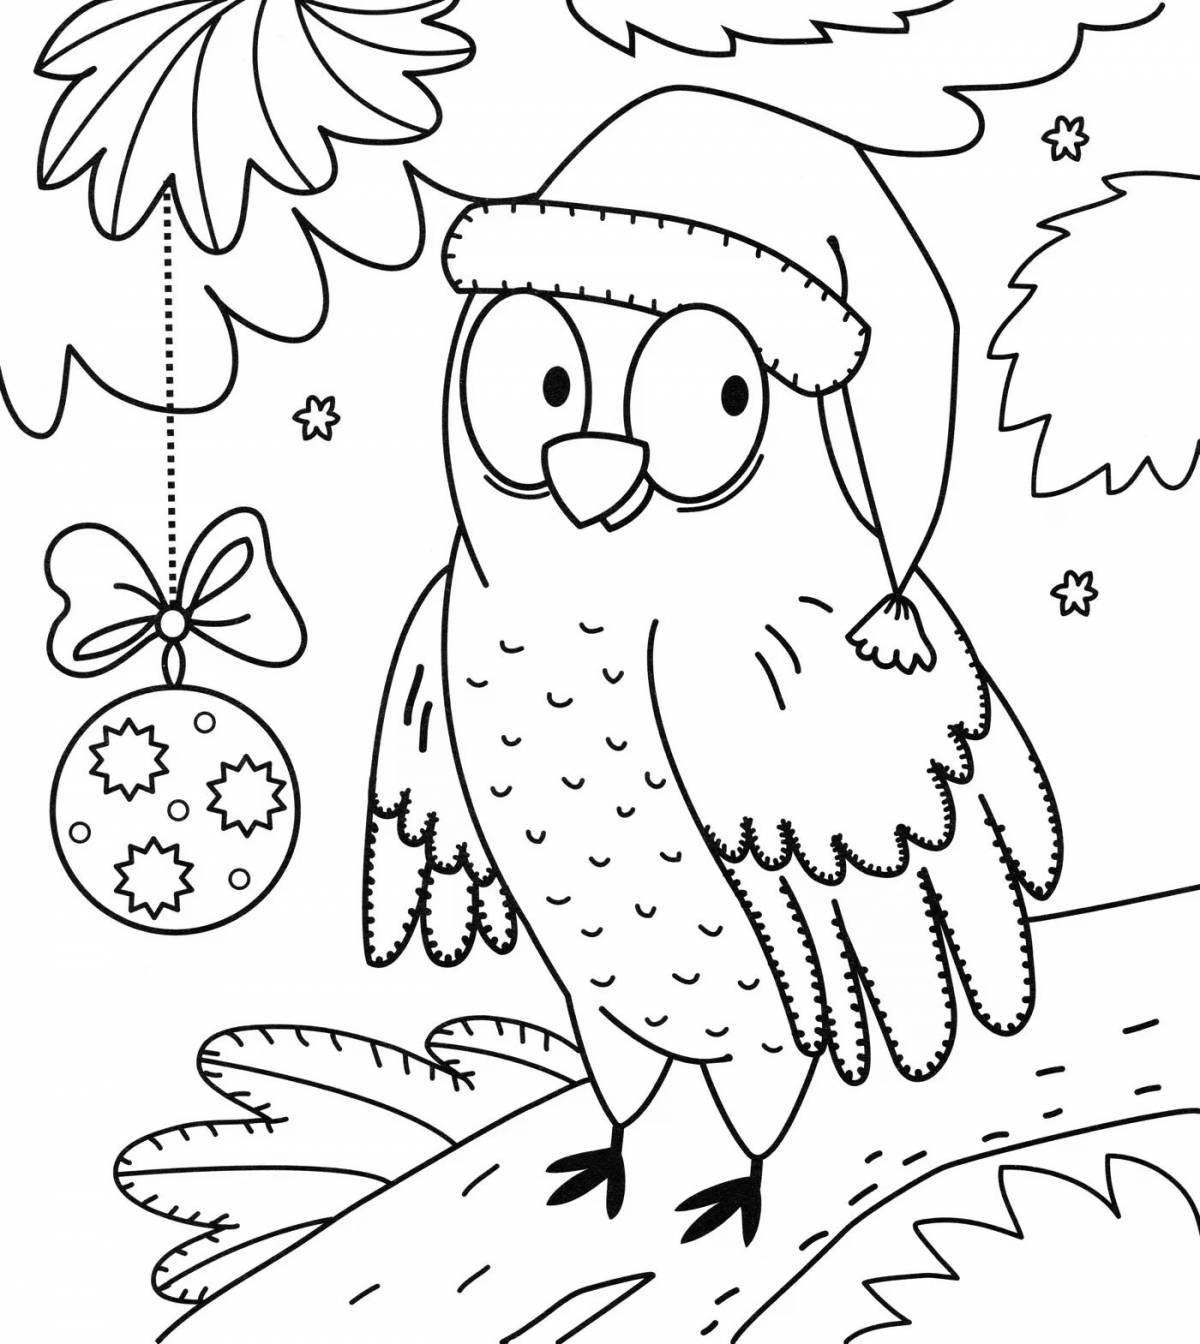 Glorious Christmas coloring book for 8-9 year olds